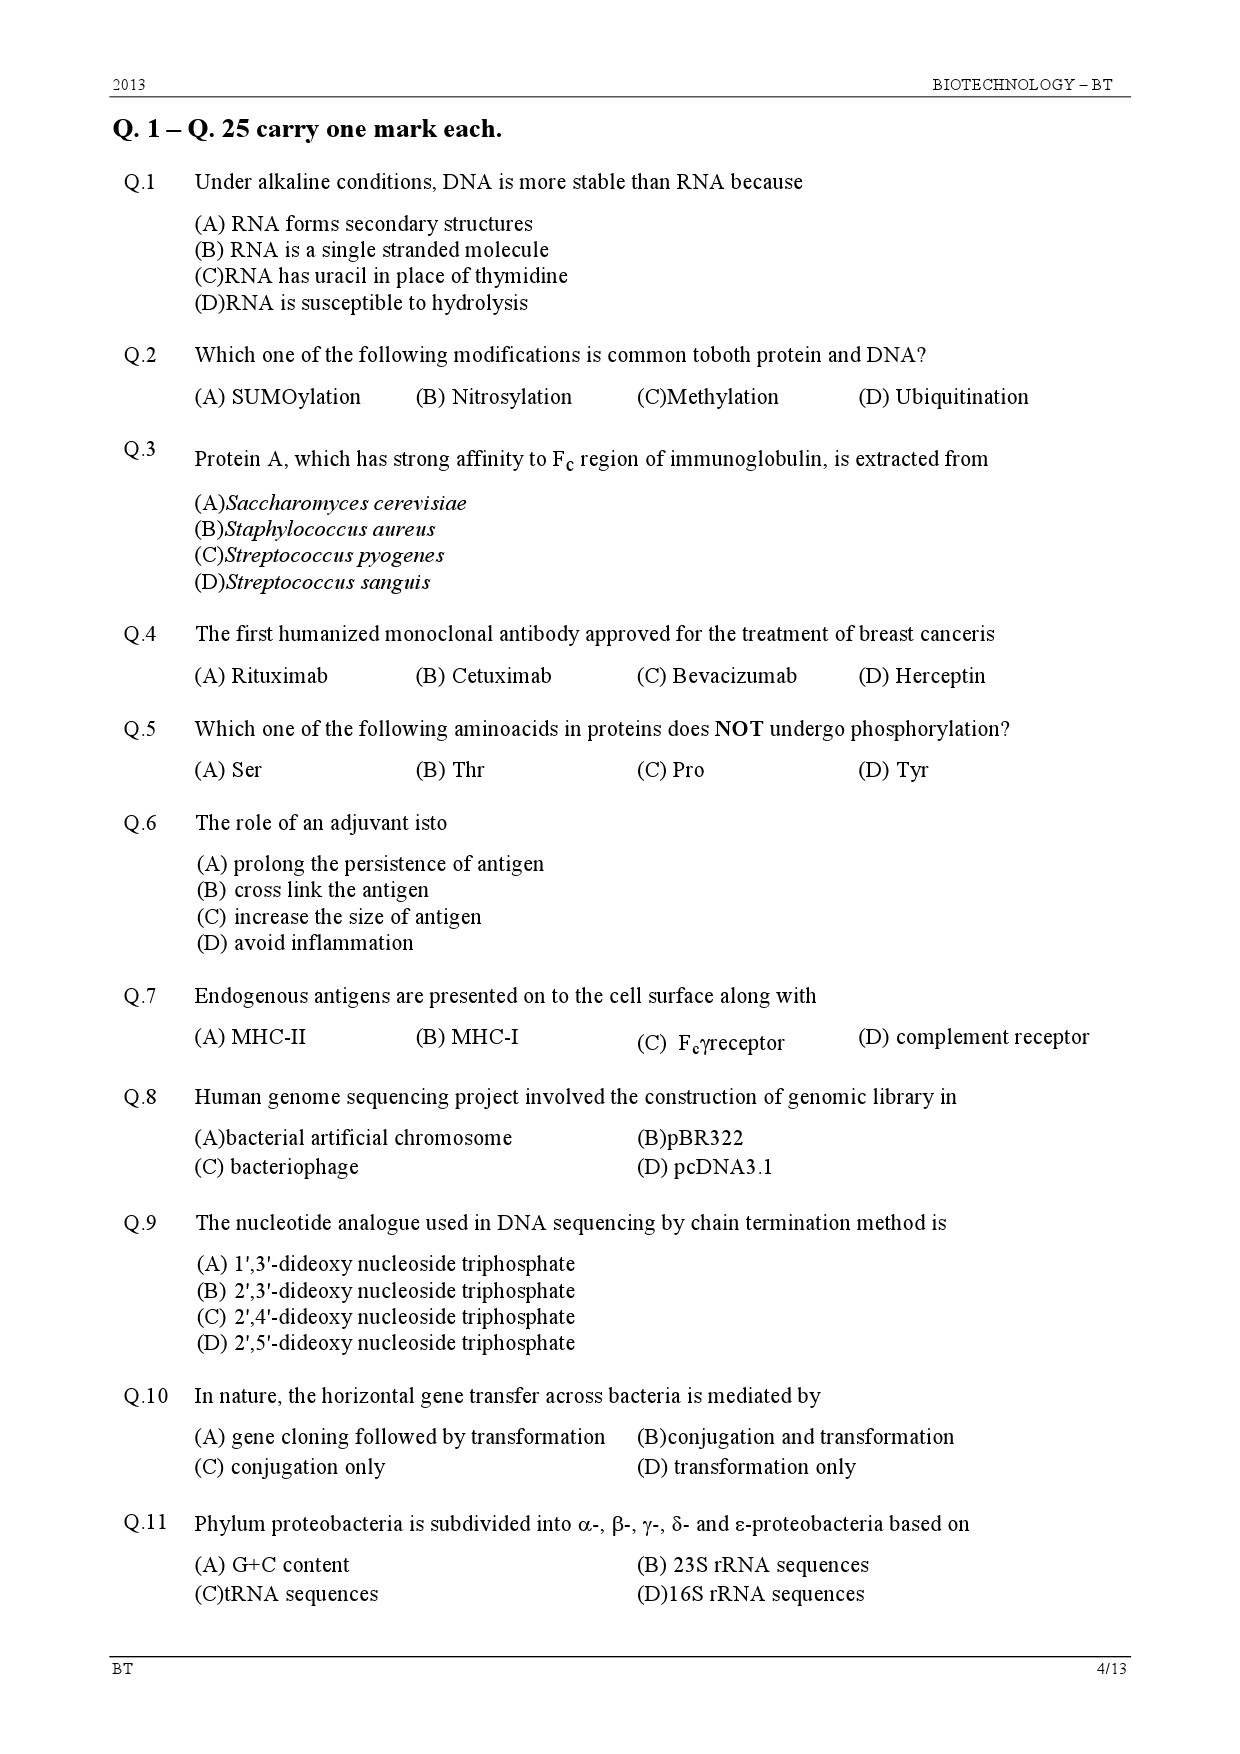 GATE Exam Question Paper 2013 Biotechnology 4